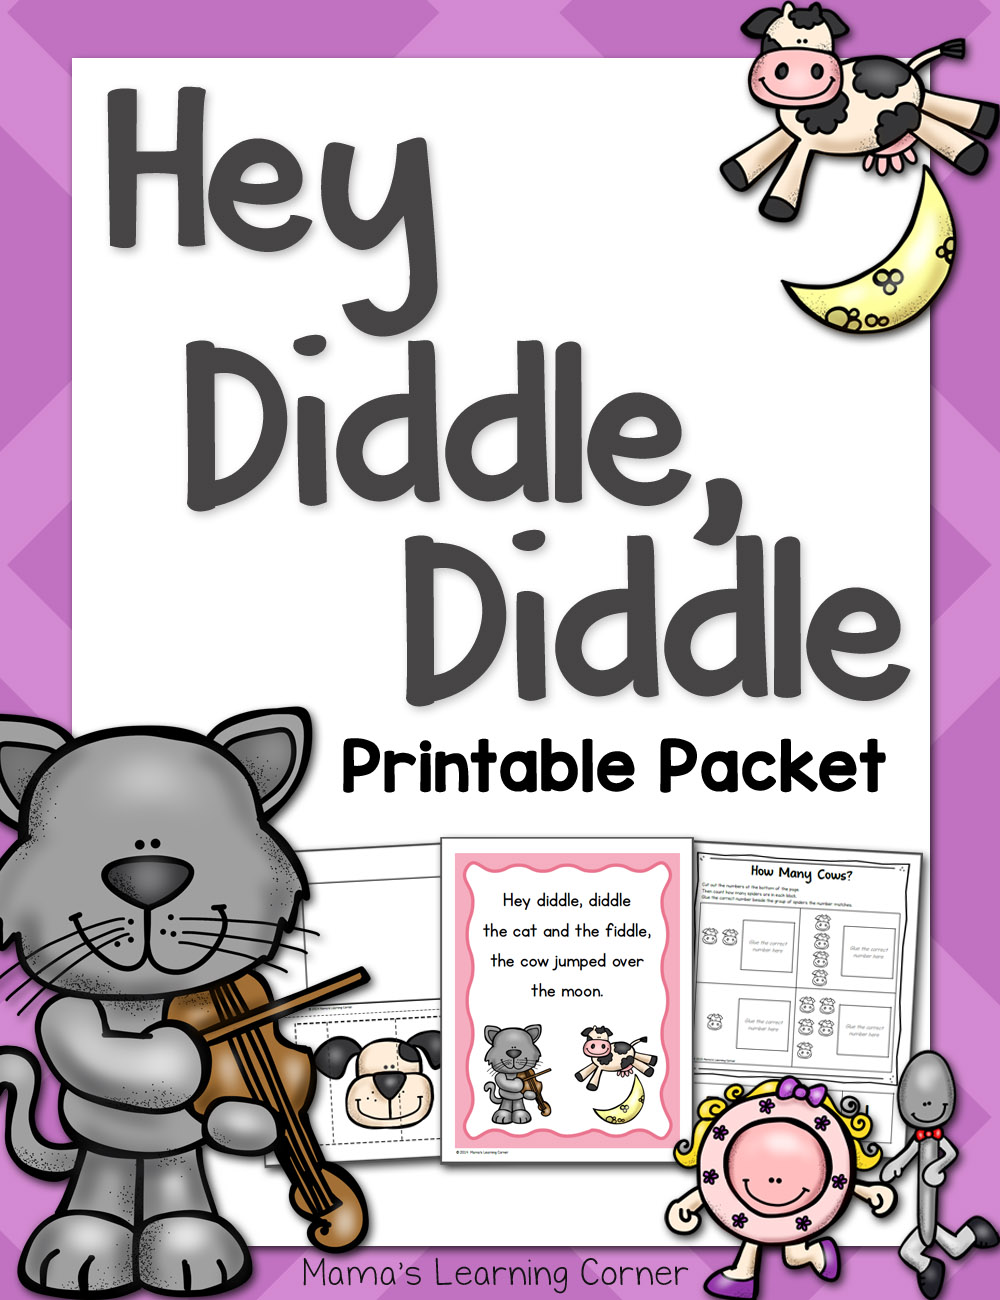 Hey Diddle Diddle Nursery Rhyme Packet - Mamas Learning Corner